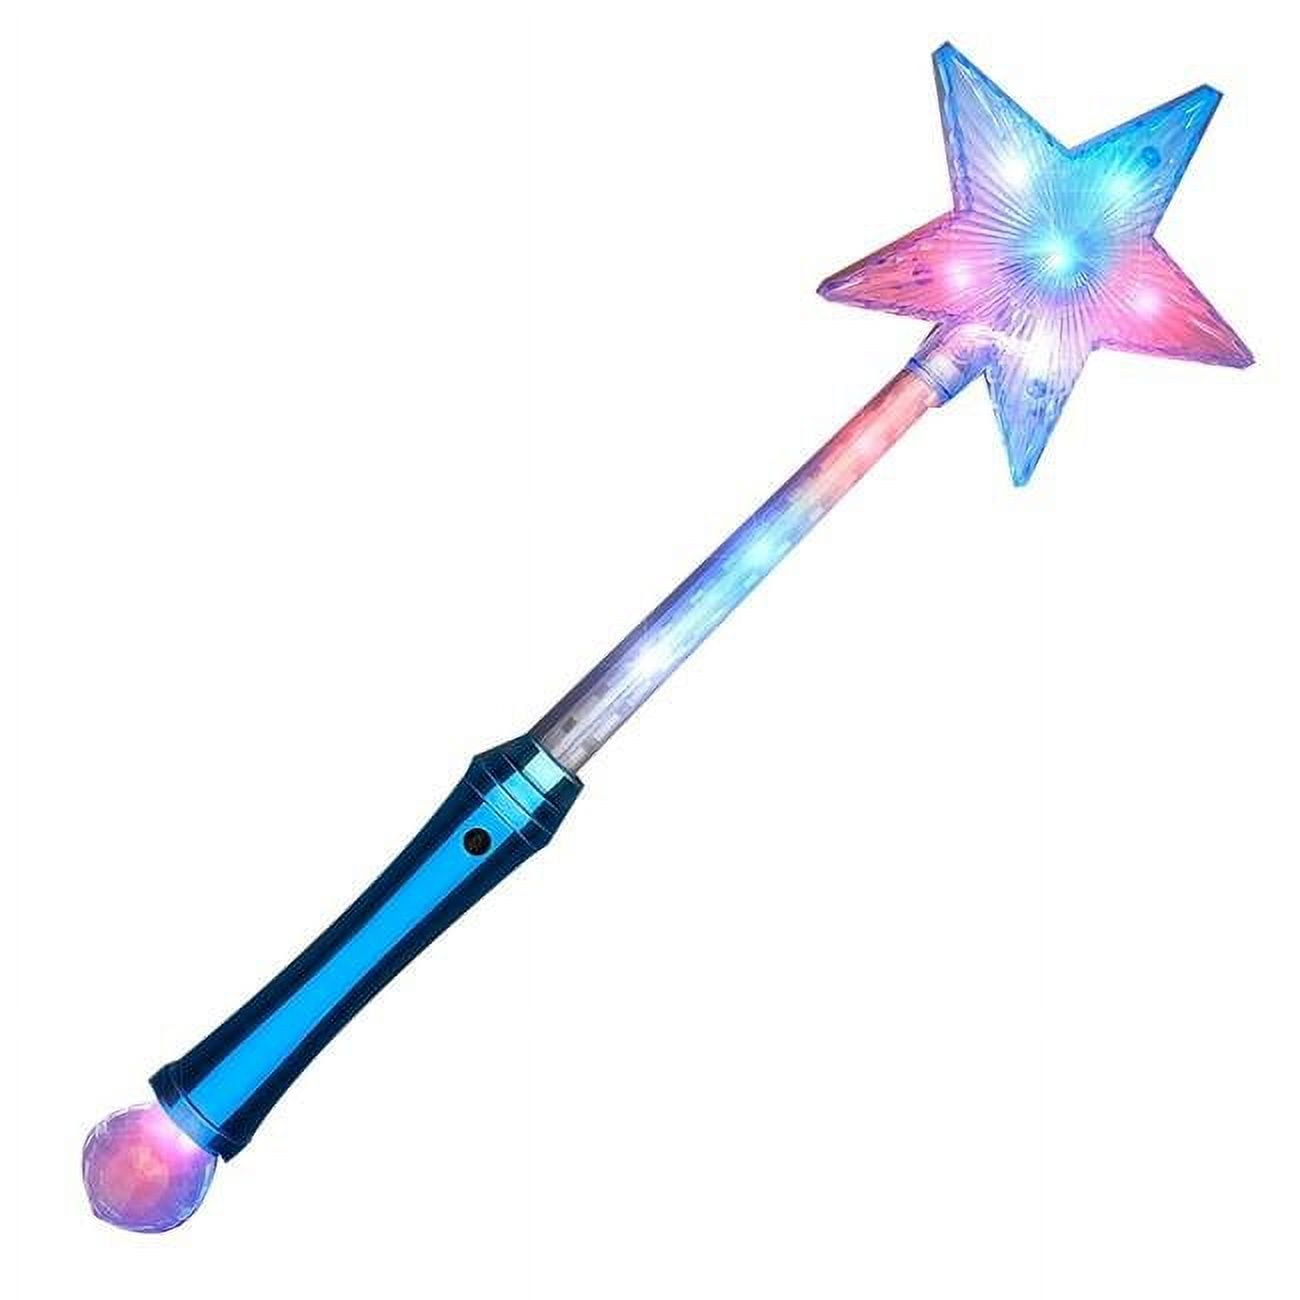 141070 Crystal Star Wand With Leds, Red, White & Blue